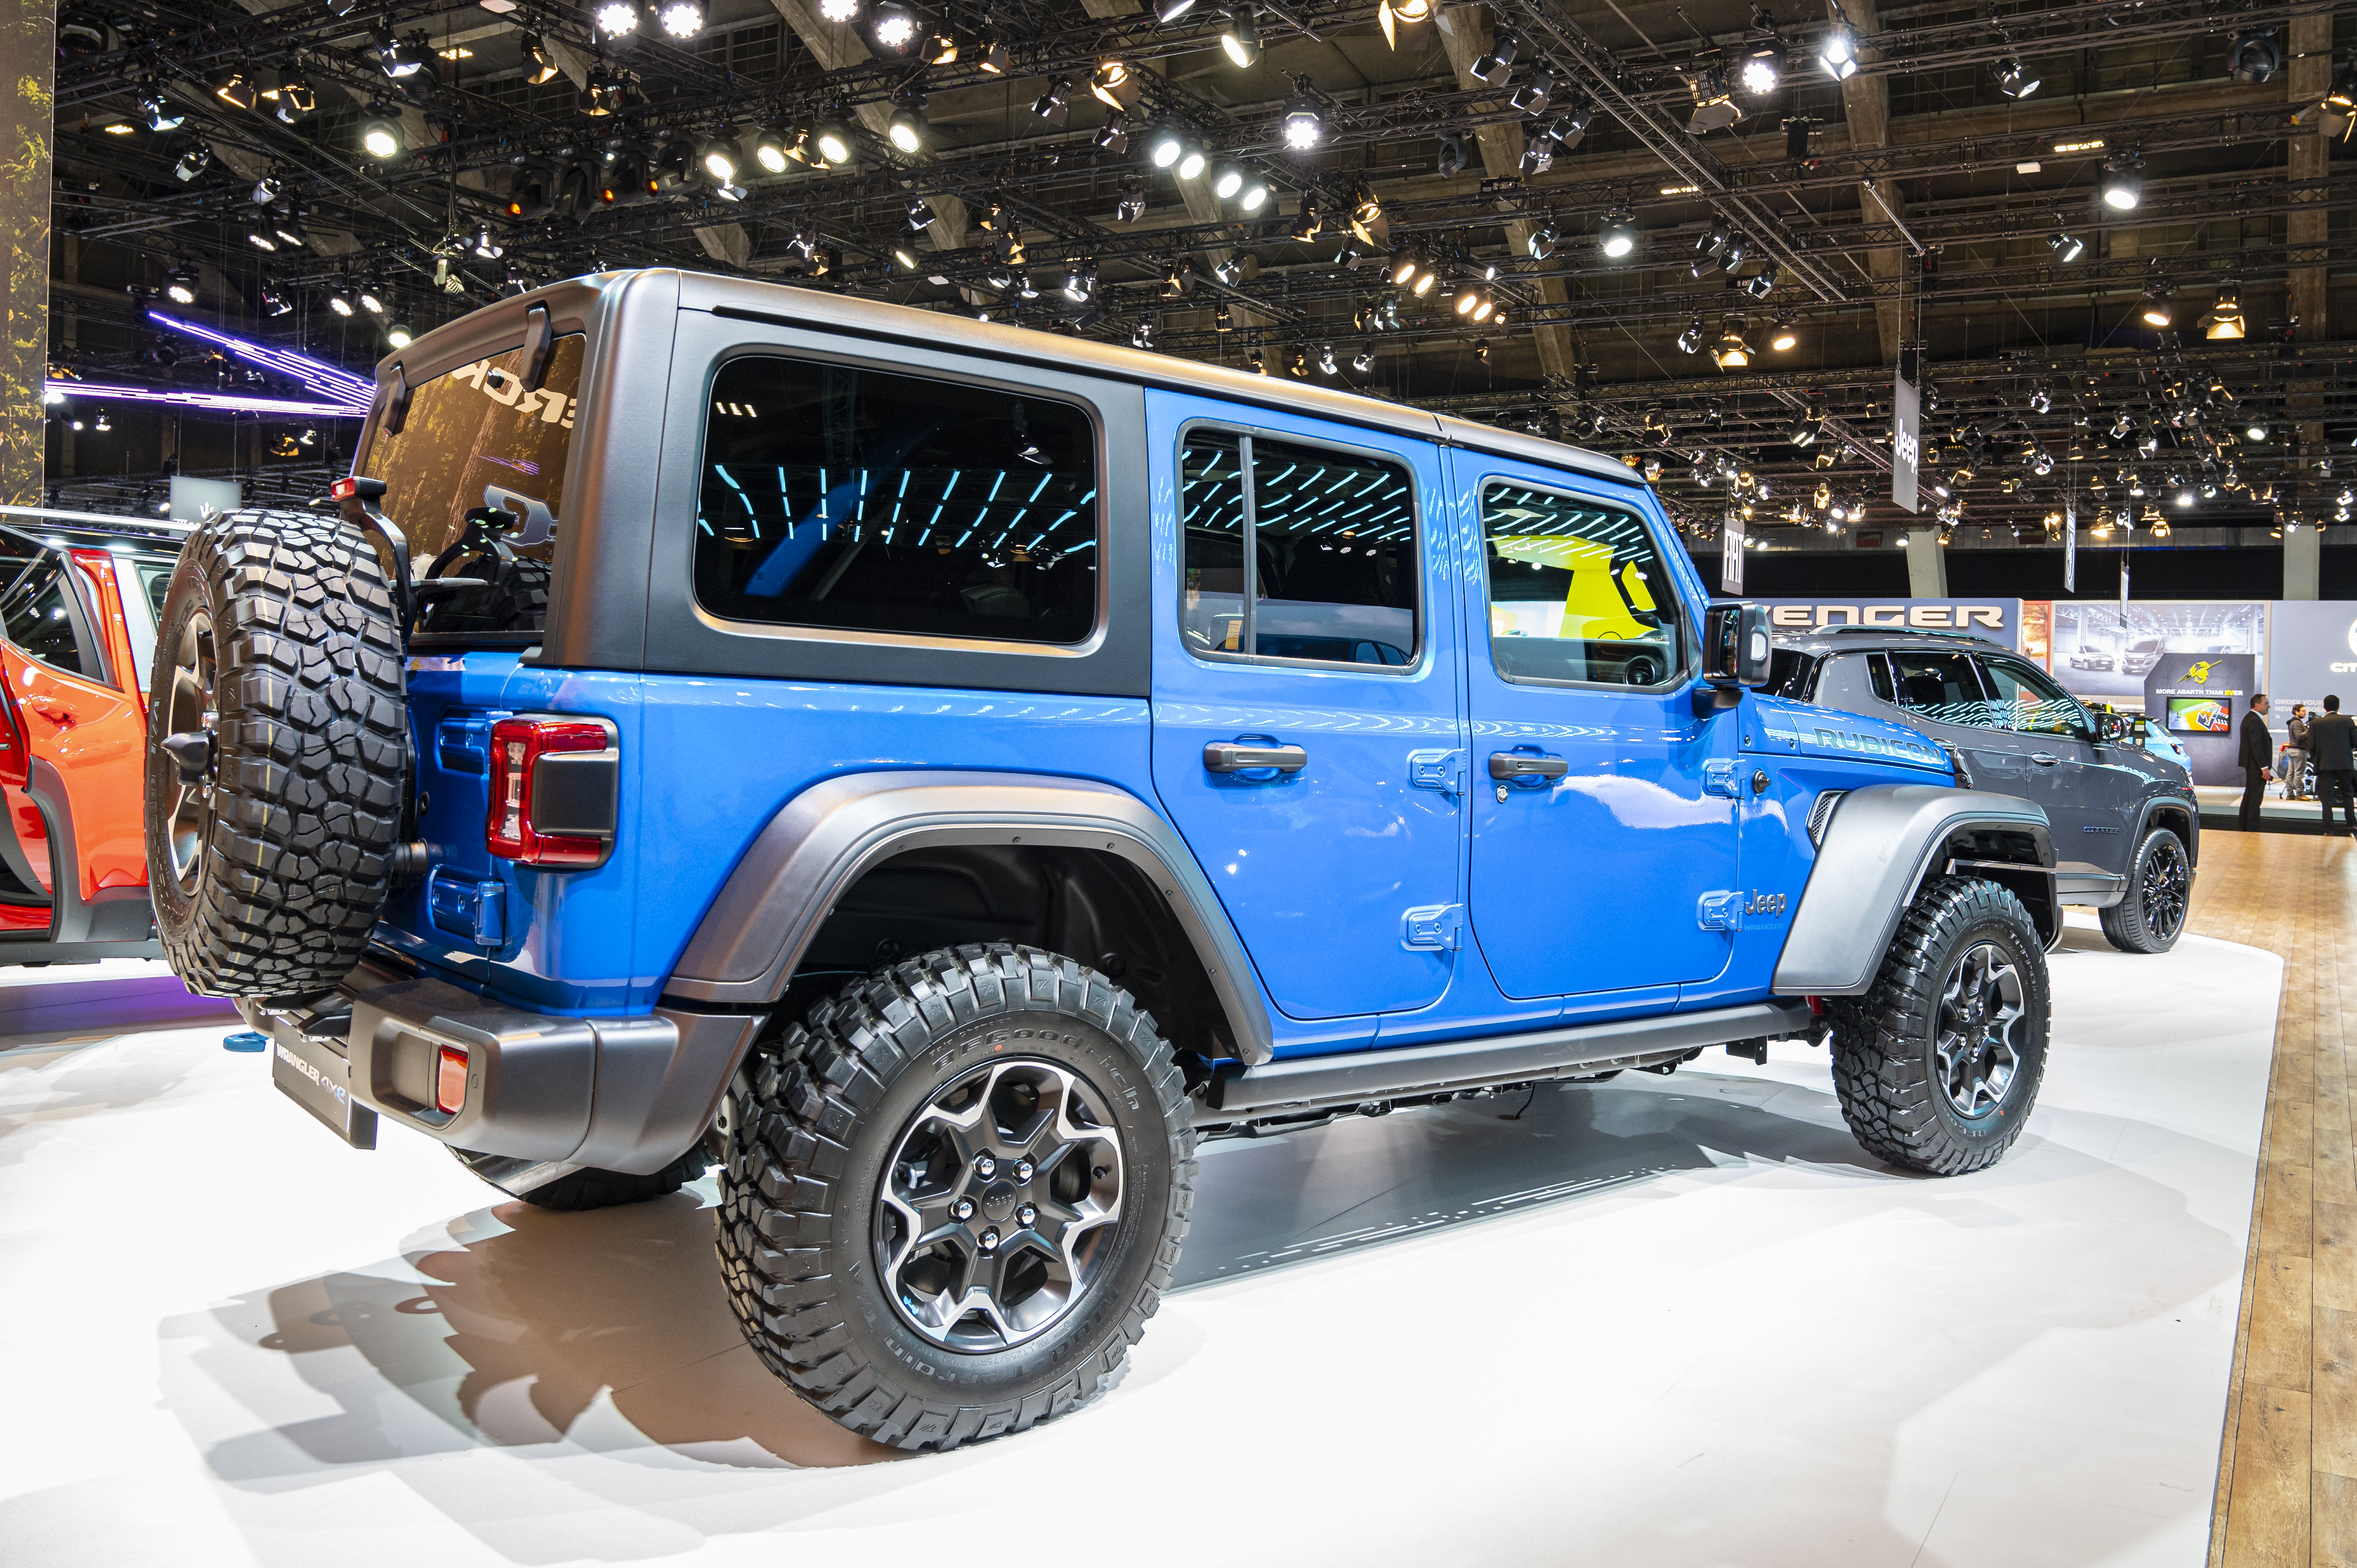 Jeep Wrangler 4XE Rubicon Plug-in Hybrid off road vehicle at Brussels Expo on January 13, 2023 in Brussels, Belgium.